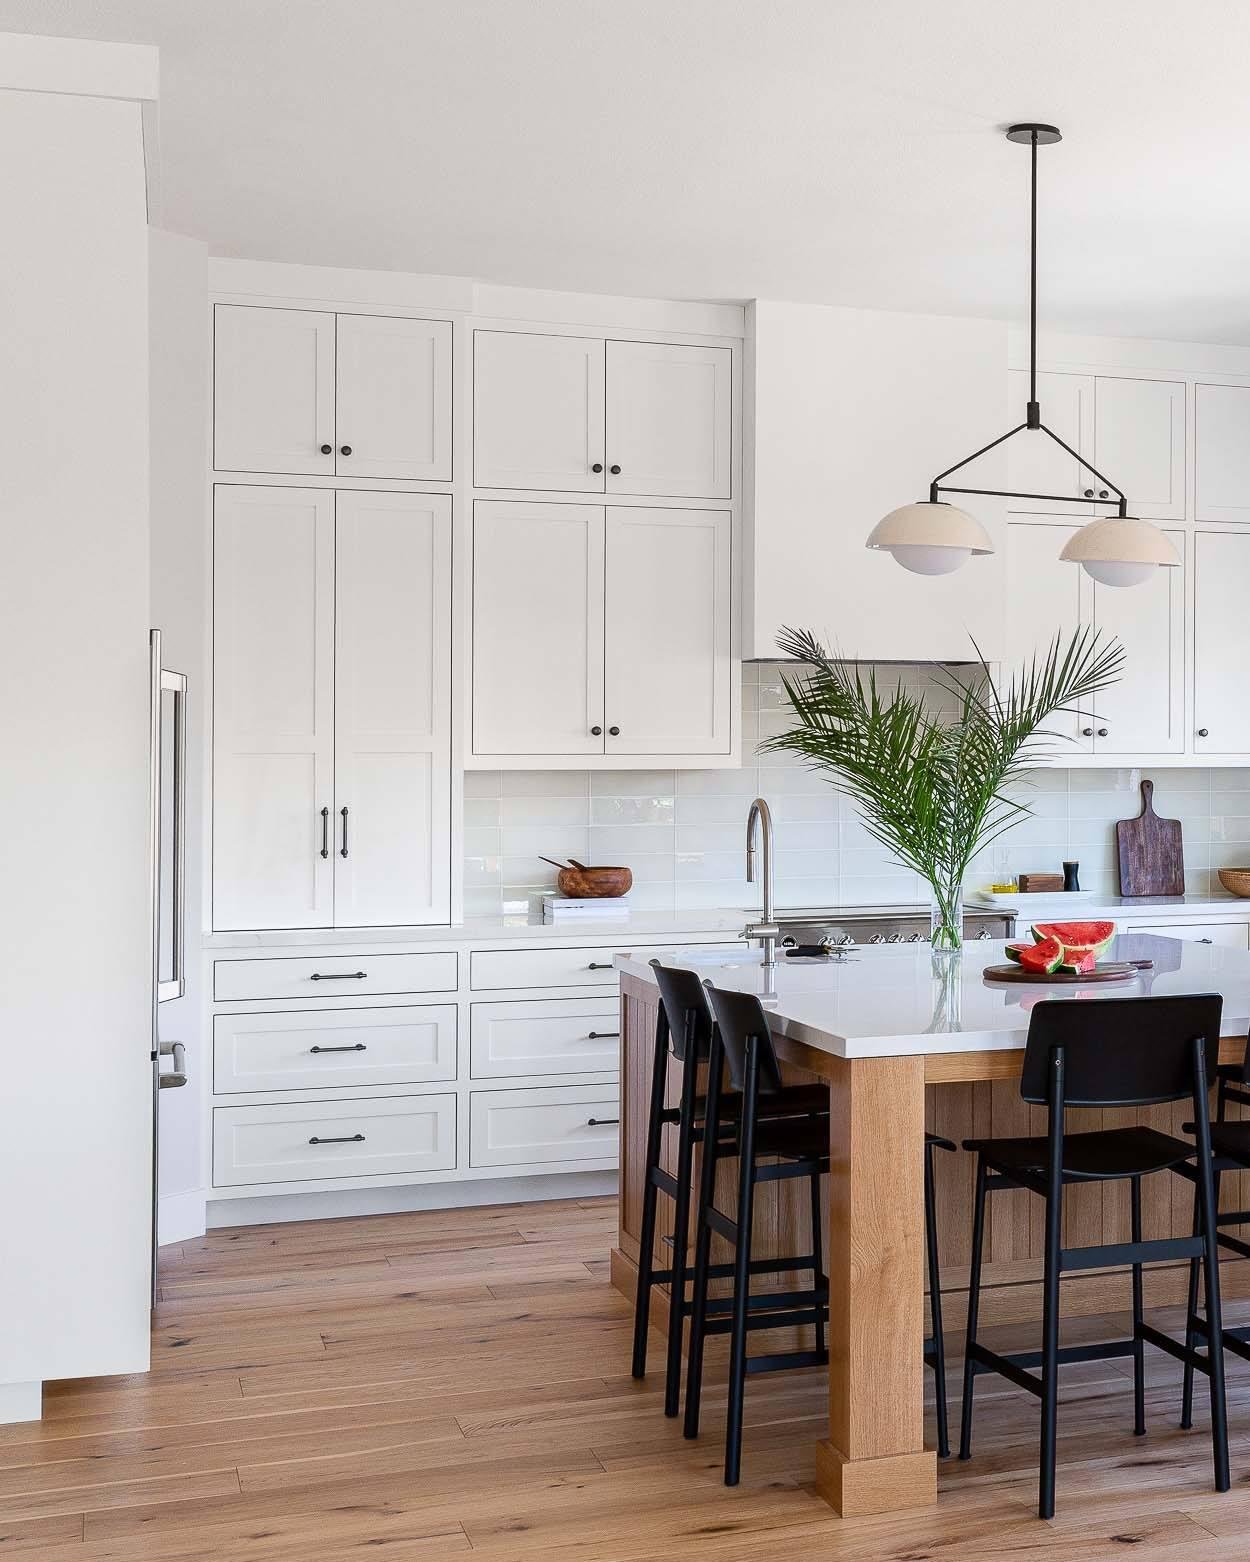 East Bay kitchen with storage galore | design by @meganwarrendesign 
#interiordesignphotography #interiordesignphotographer #designphotographer #bayareainteriordesign #bayareainteriordesigner #sanfranciscointeriordesign #sanfranciscointeriordesigner 